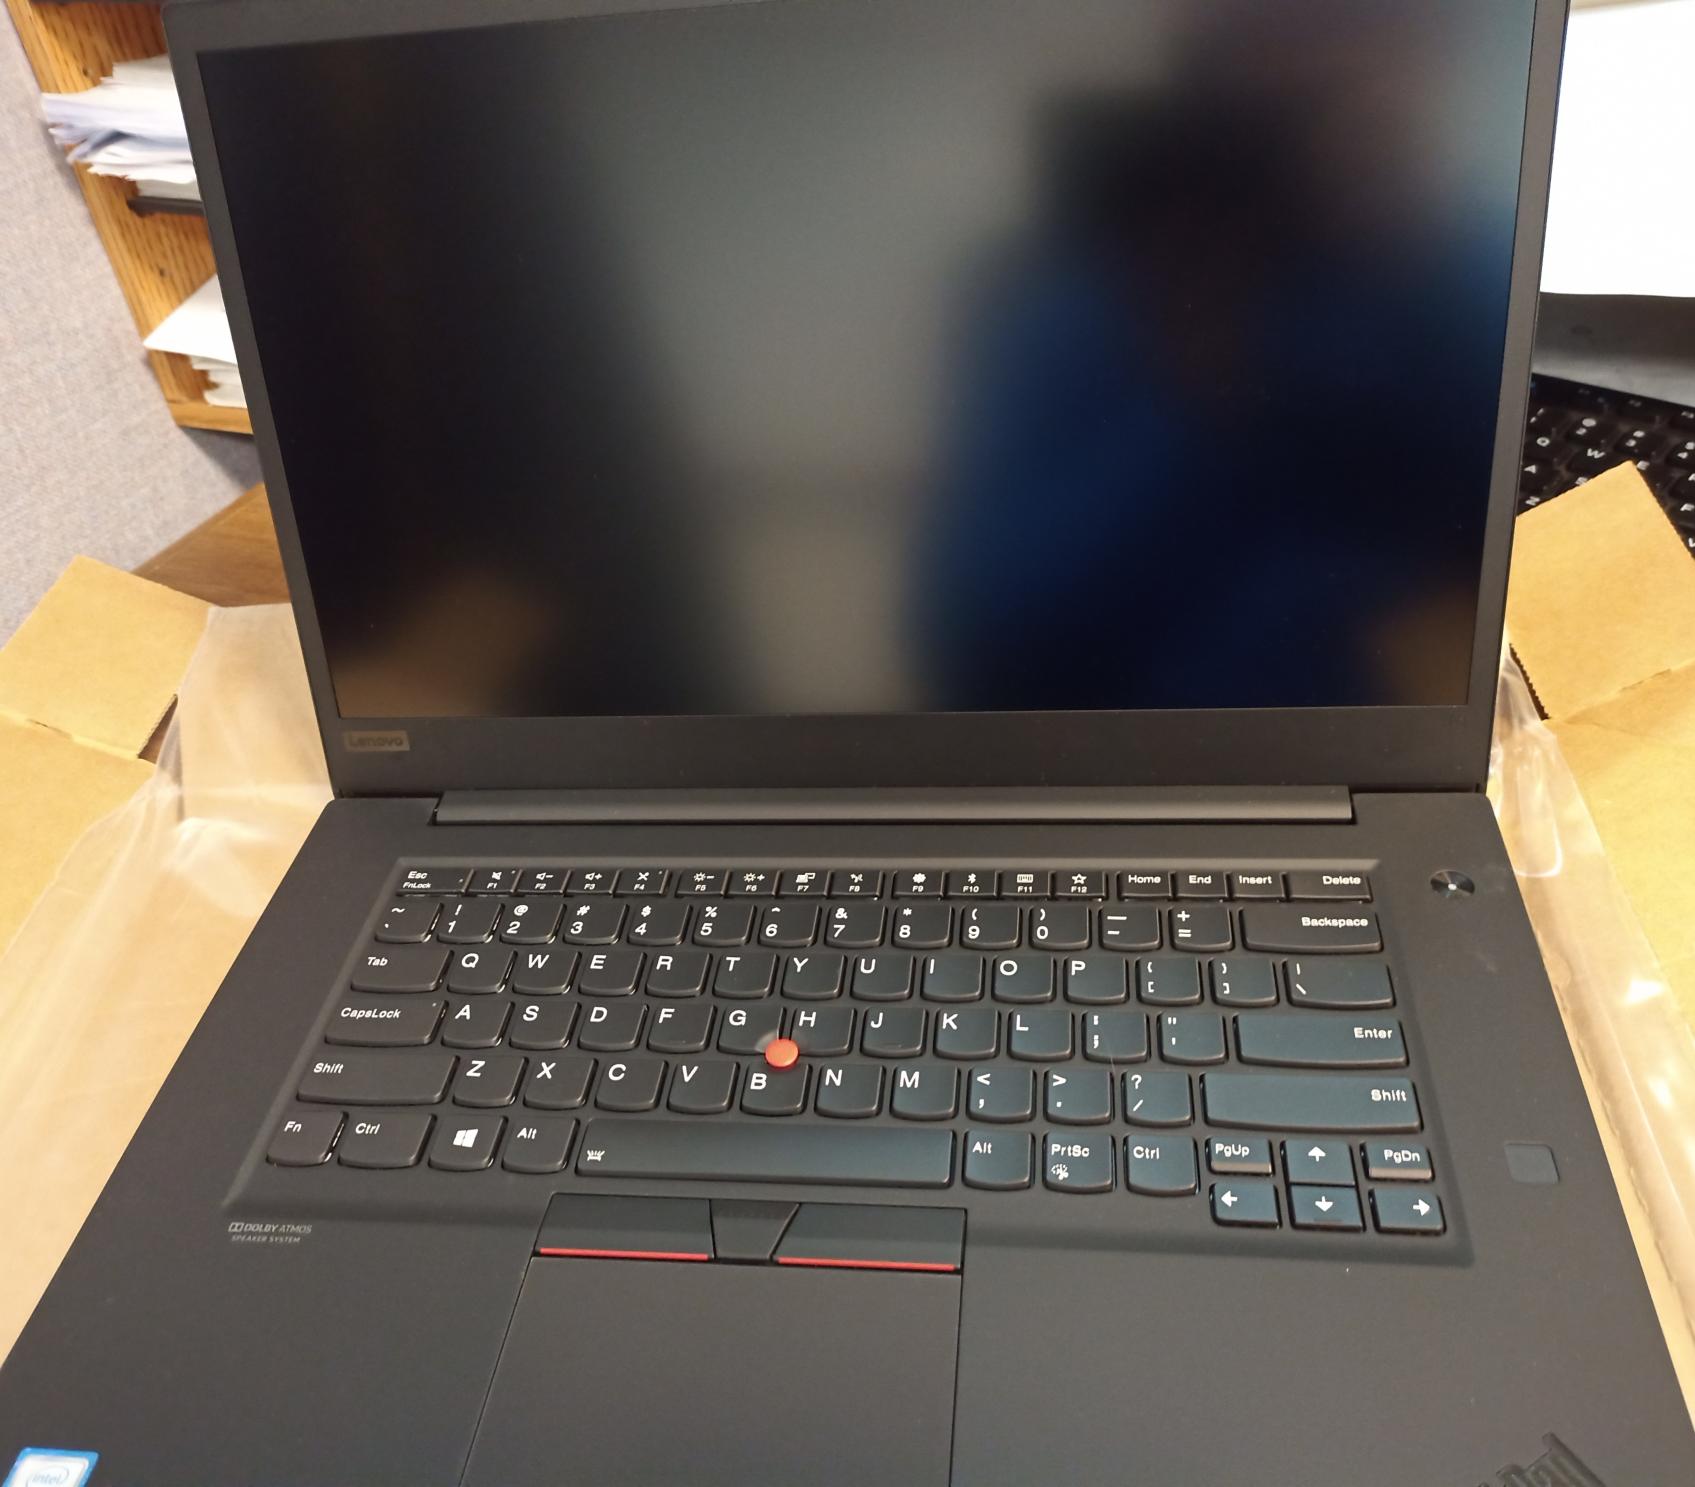 The actual received unit, it is a ThinkPad P1